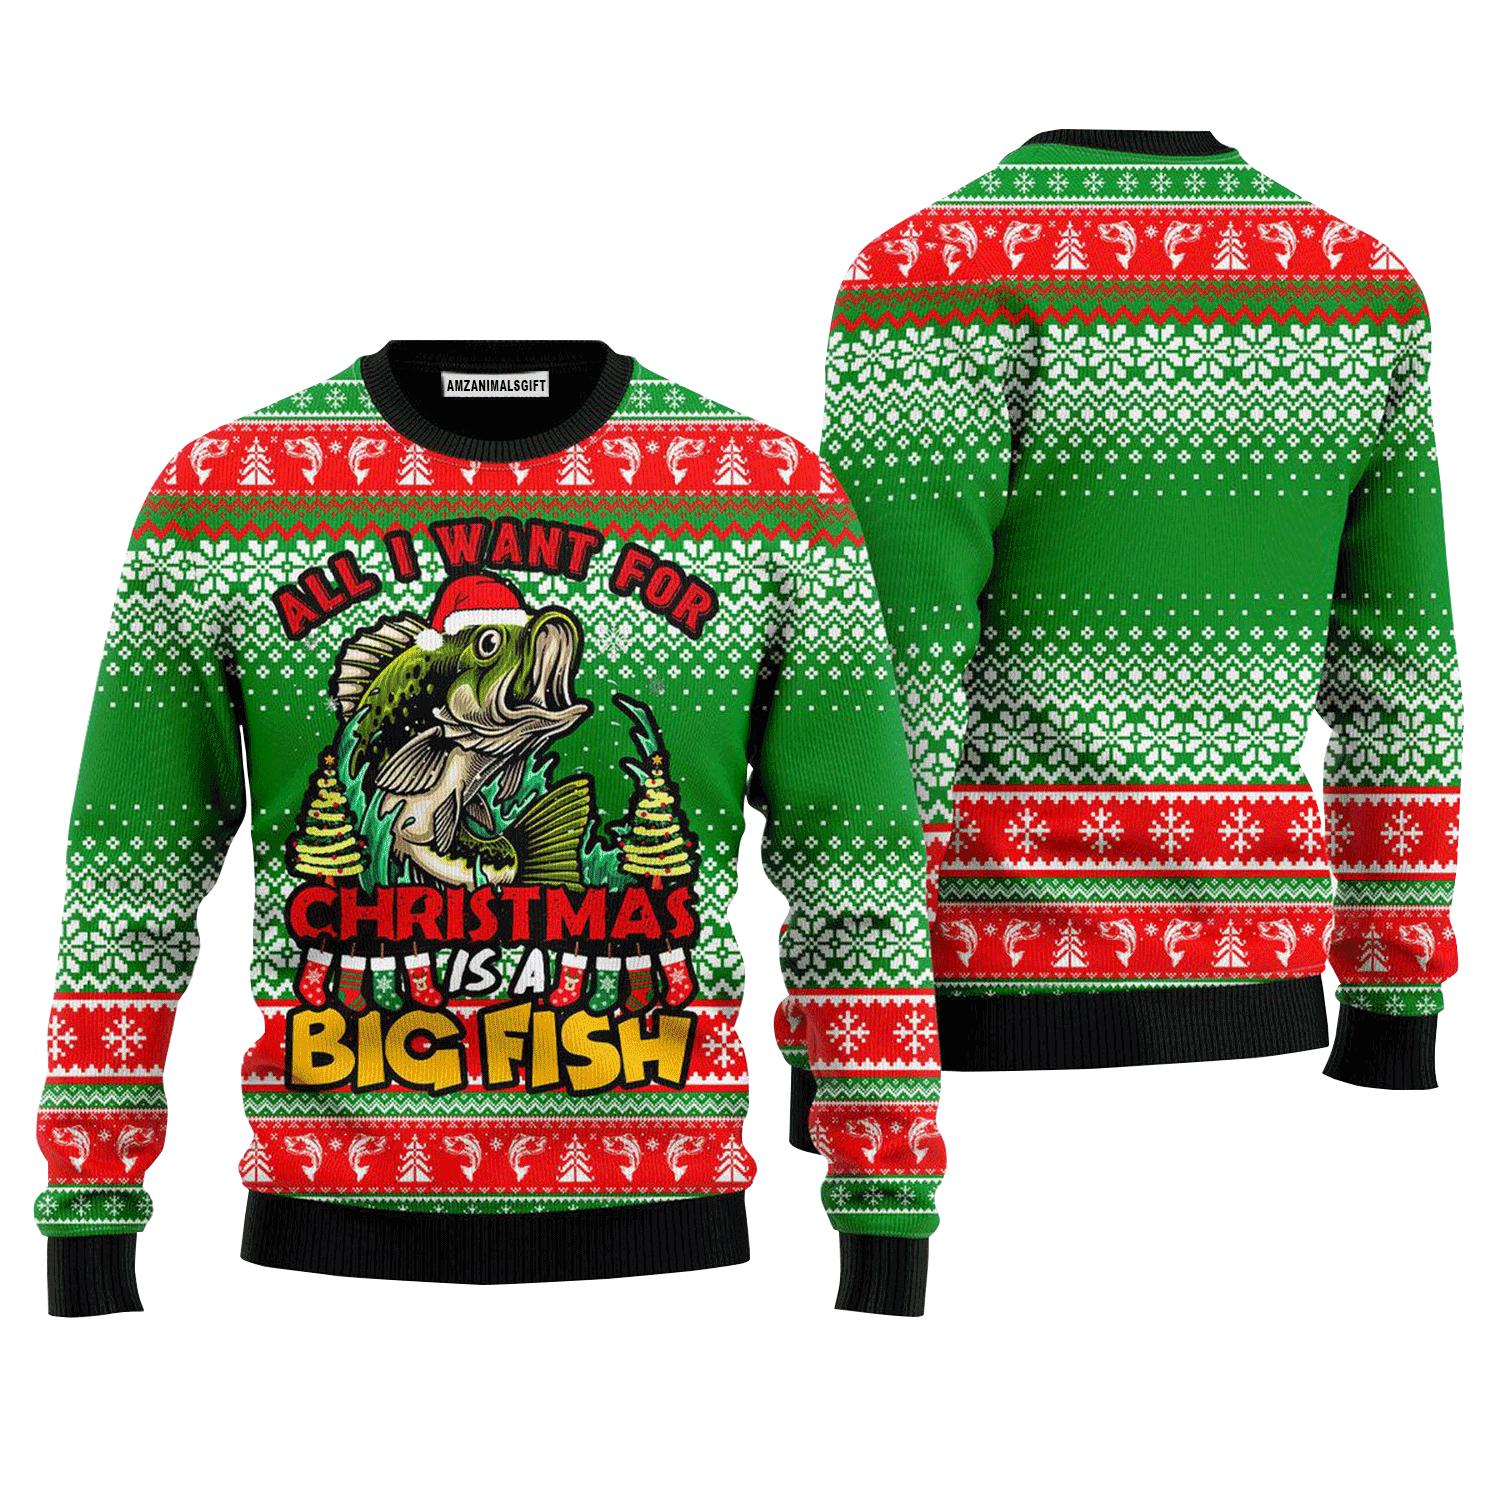 Fishing Sweater All I Want For Christmas Is A Big Fish, Ugly Sweater For Men & Women, Perfect Outfit For Christmas New Year Autumn Winter